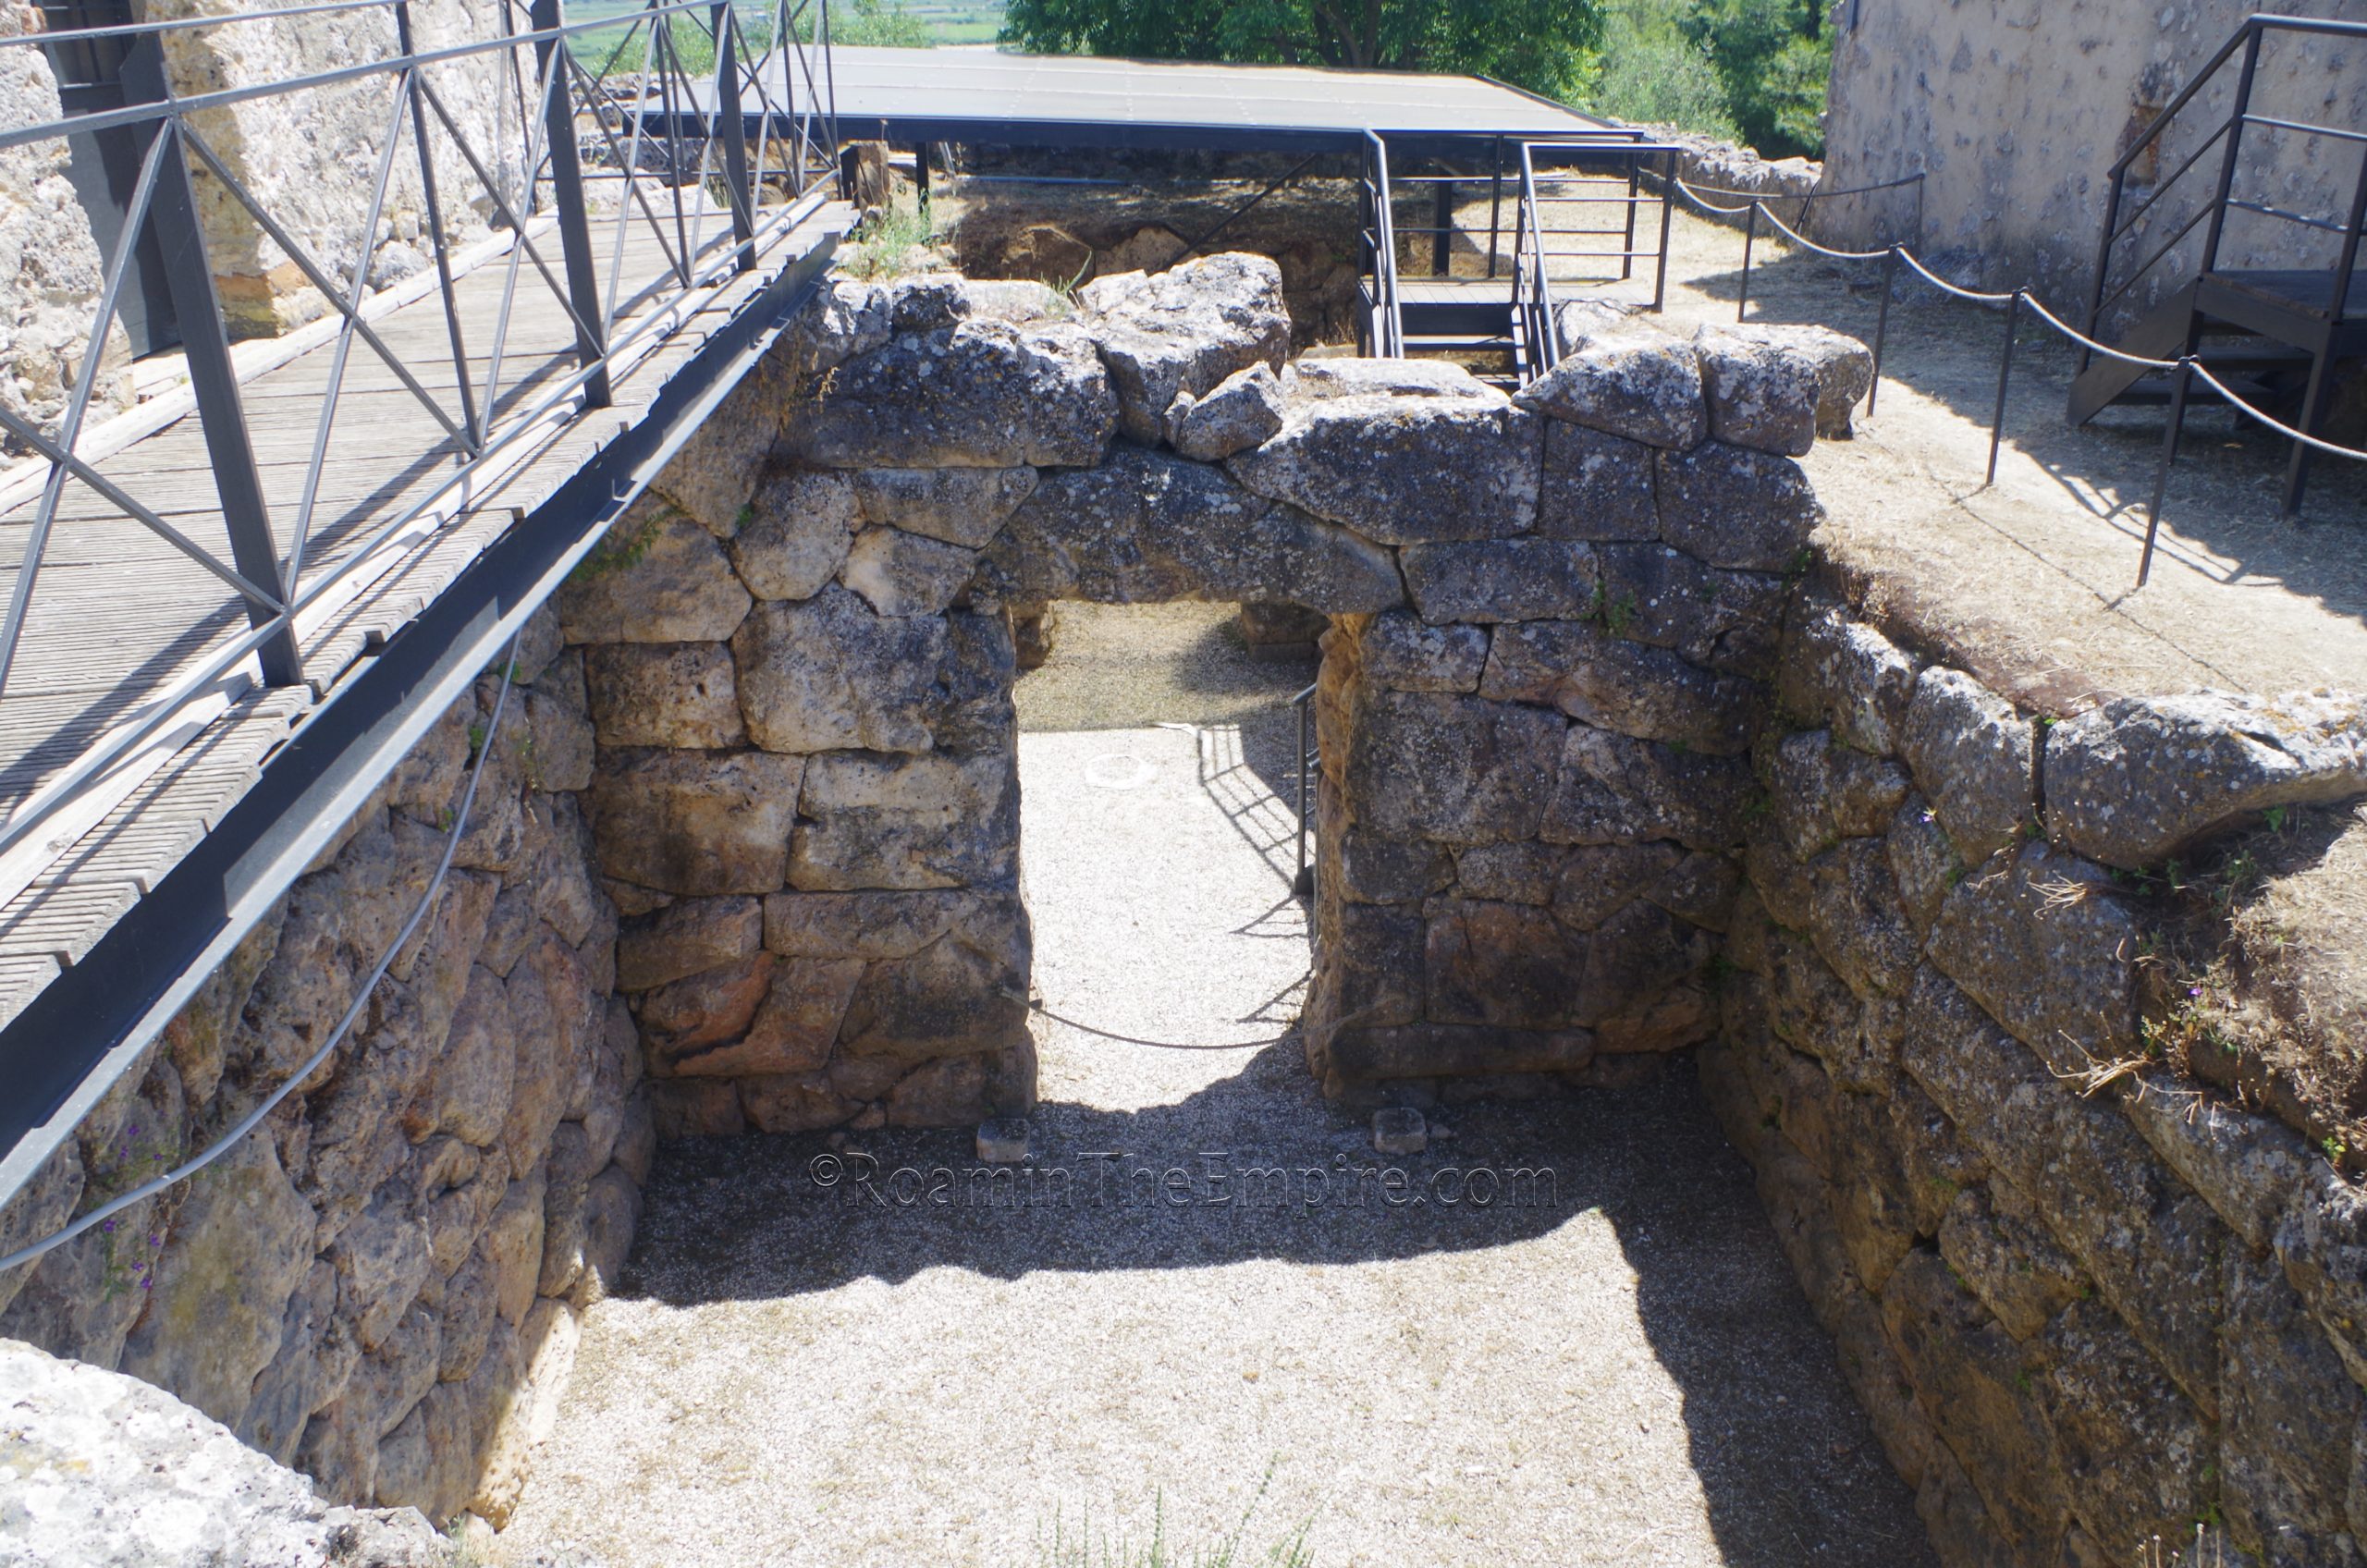 Rooms of the core structure of the Necromanteion.